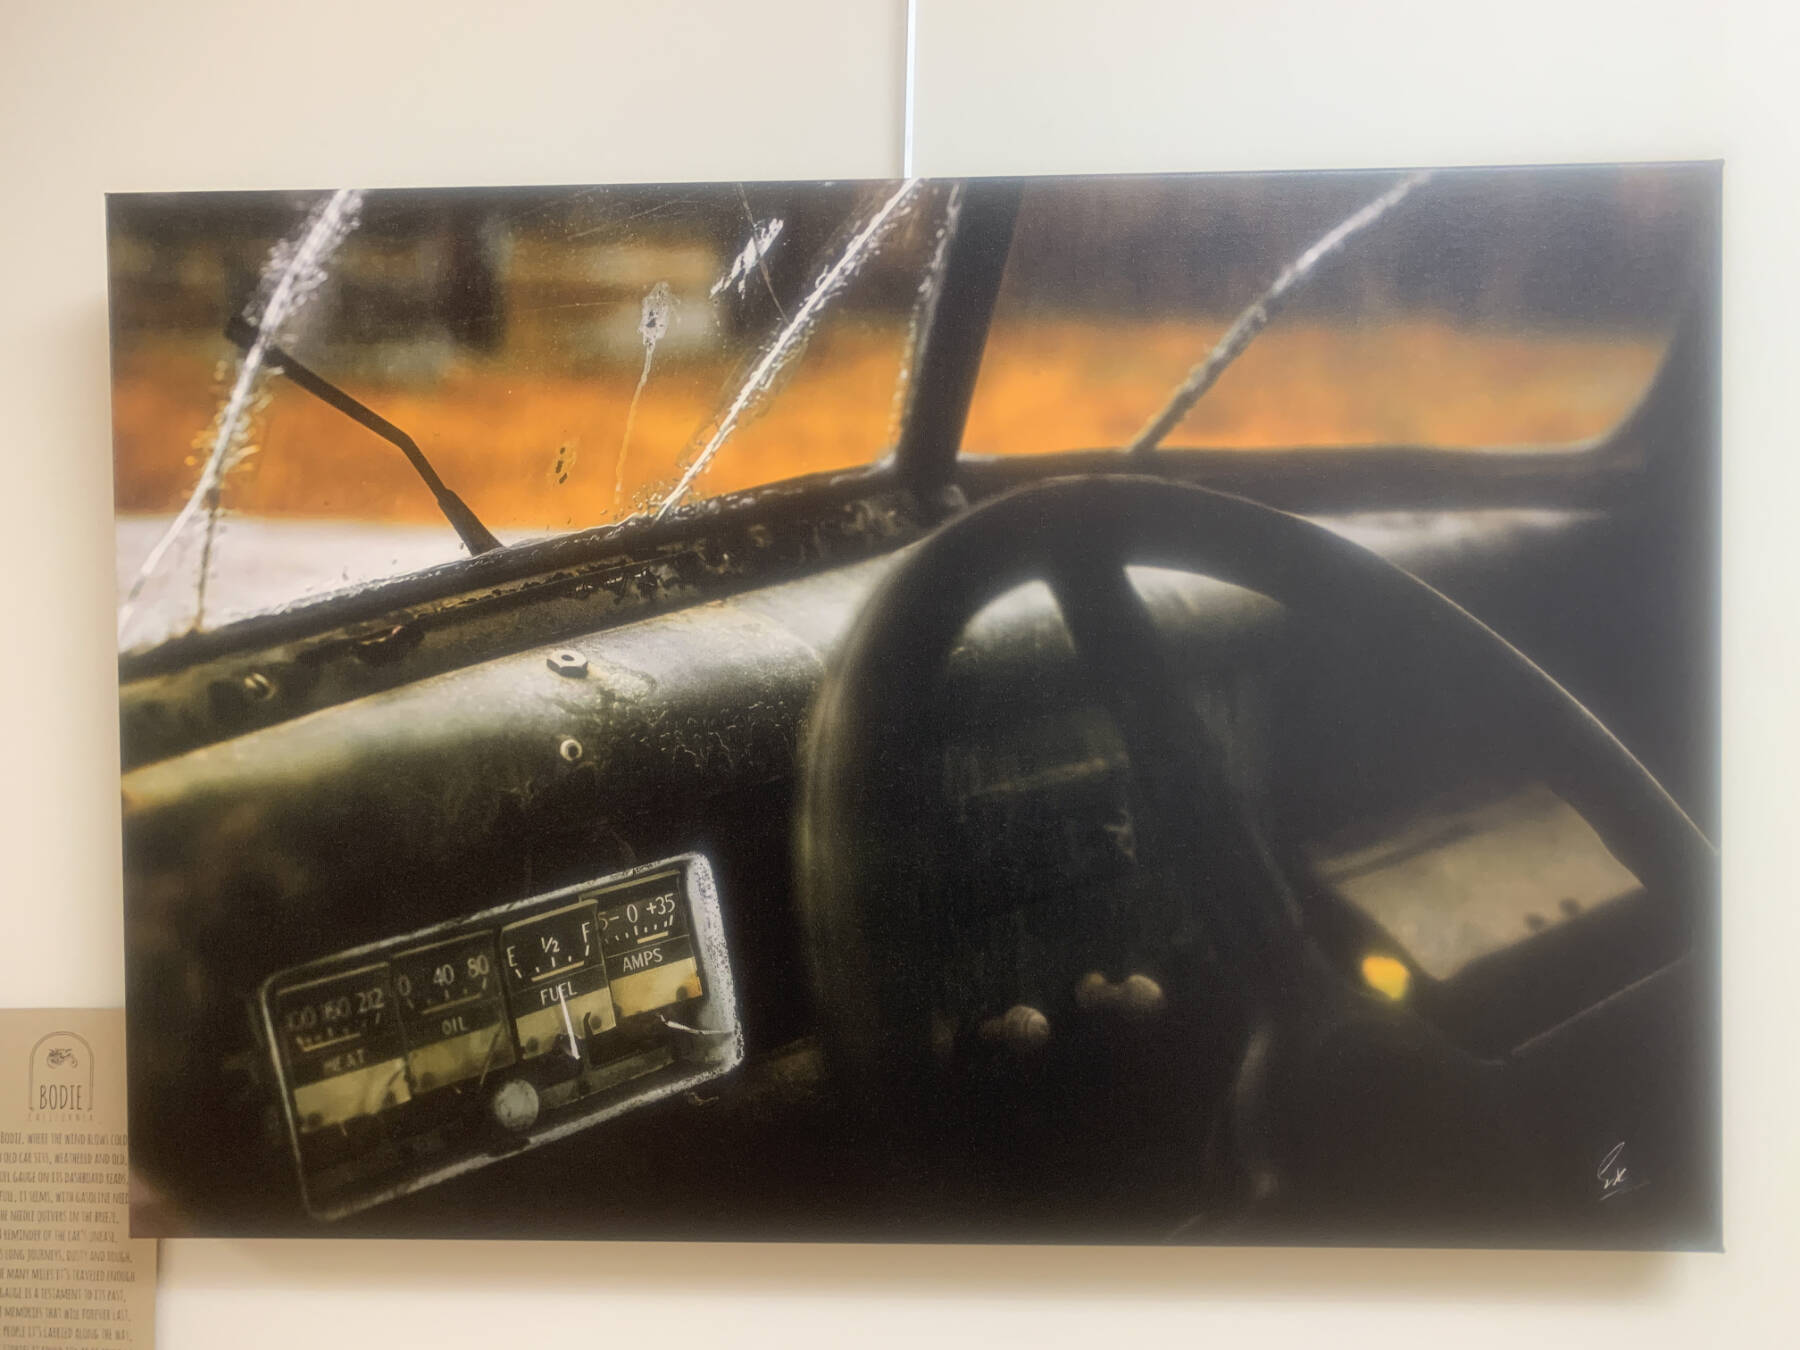 A photograph of a weathered car in Bodie, Cal. is part of Dr. Edson Knapp’s “Joy in the Journey” exhibit featuring 16 photographs in South Peninsula Hospital’s gallery through July 4, 2023. Photo by Christina Whiting